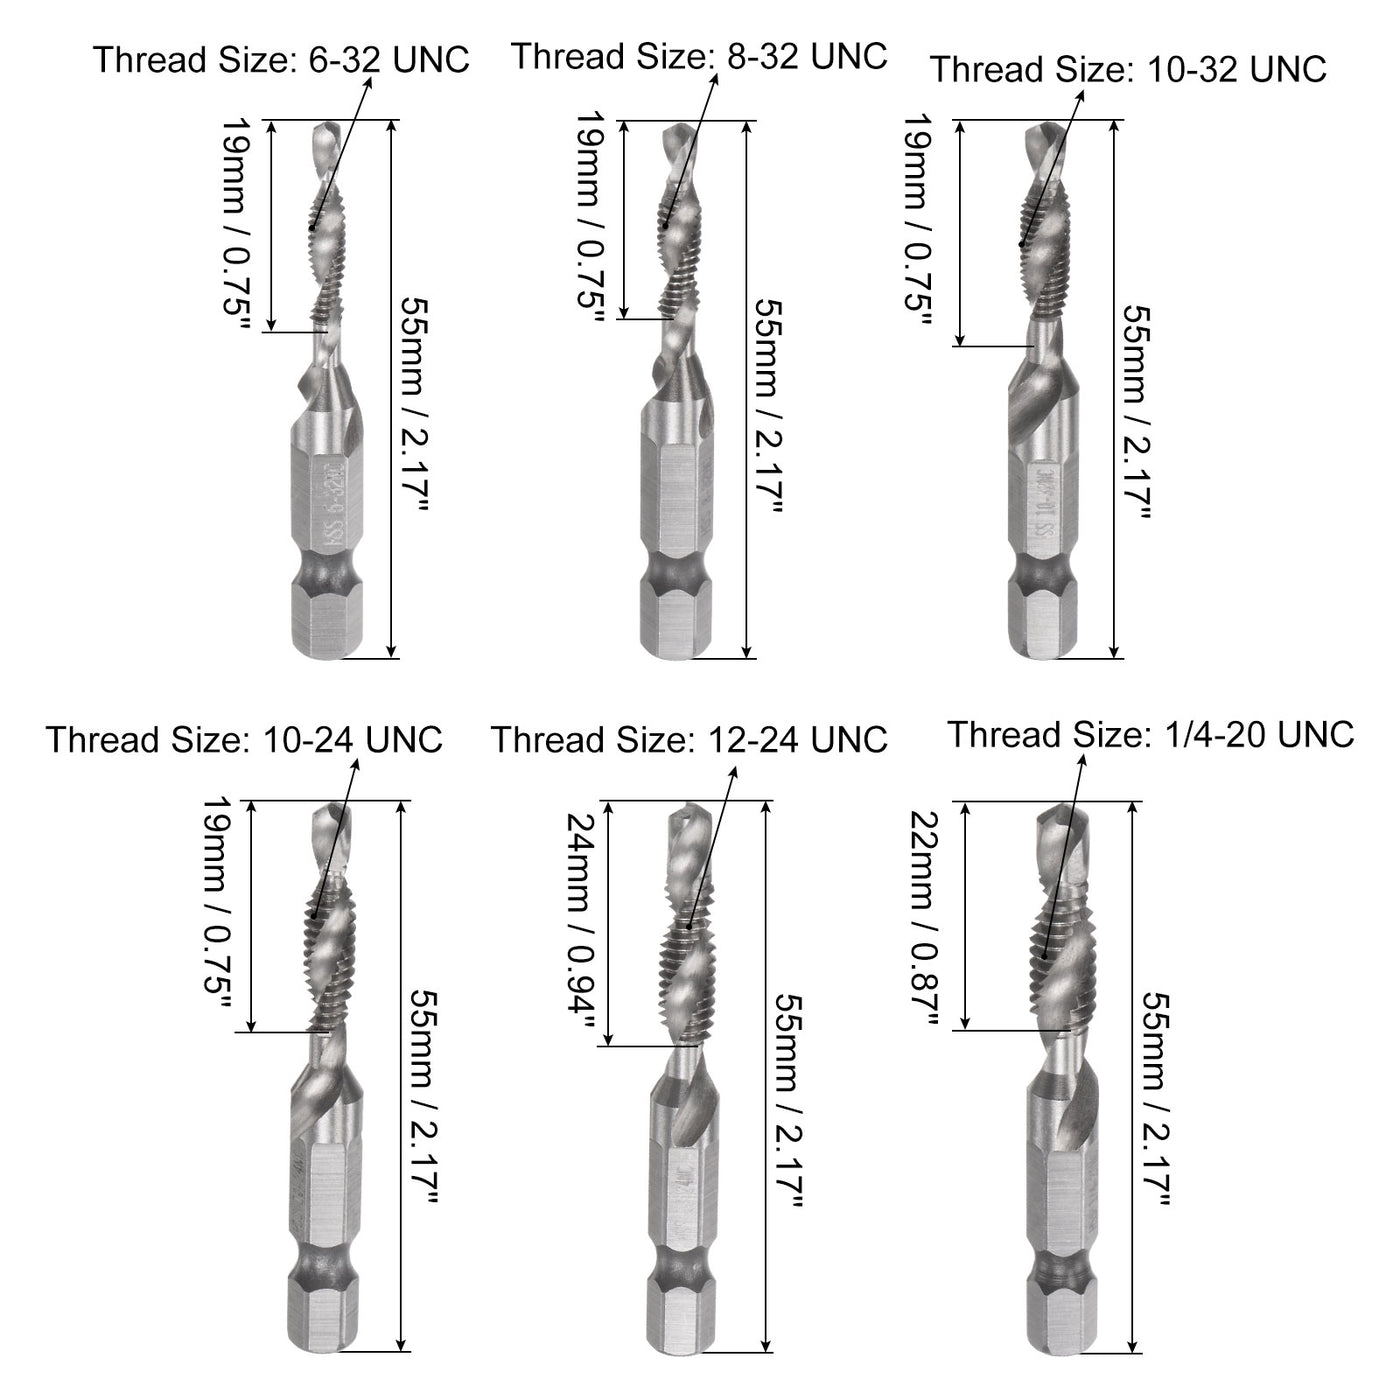 uxcell Uxcell 6-32 8-32 10-3210-24 12-24 1/4-20 High Speed Steel Combination Drill Tap Bit Set